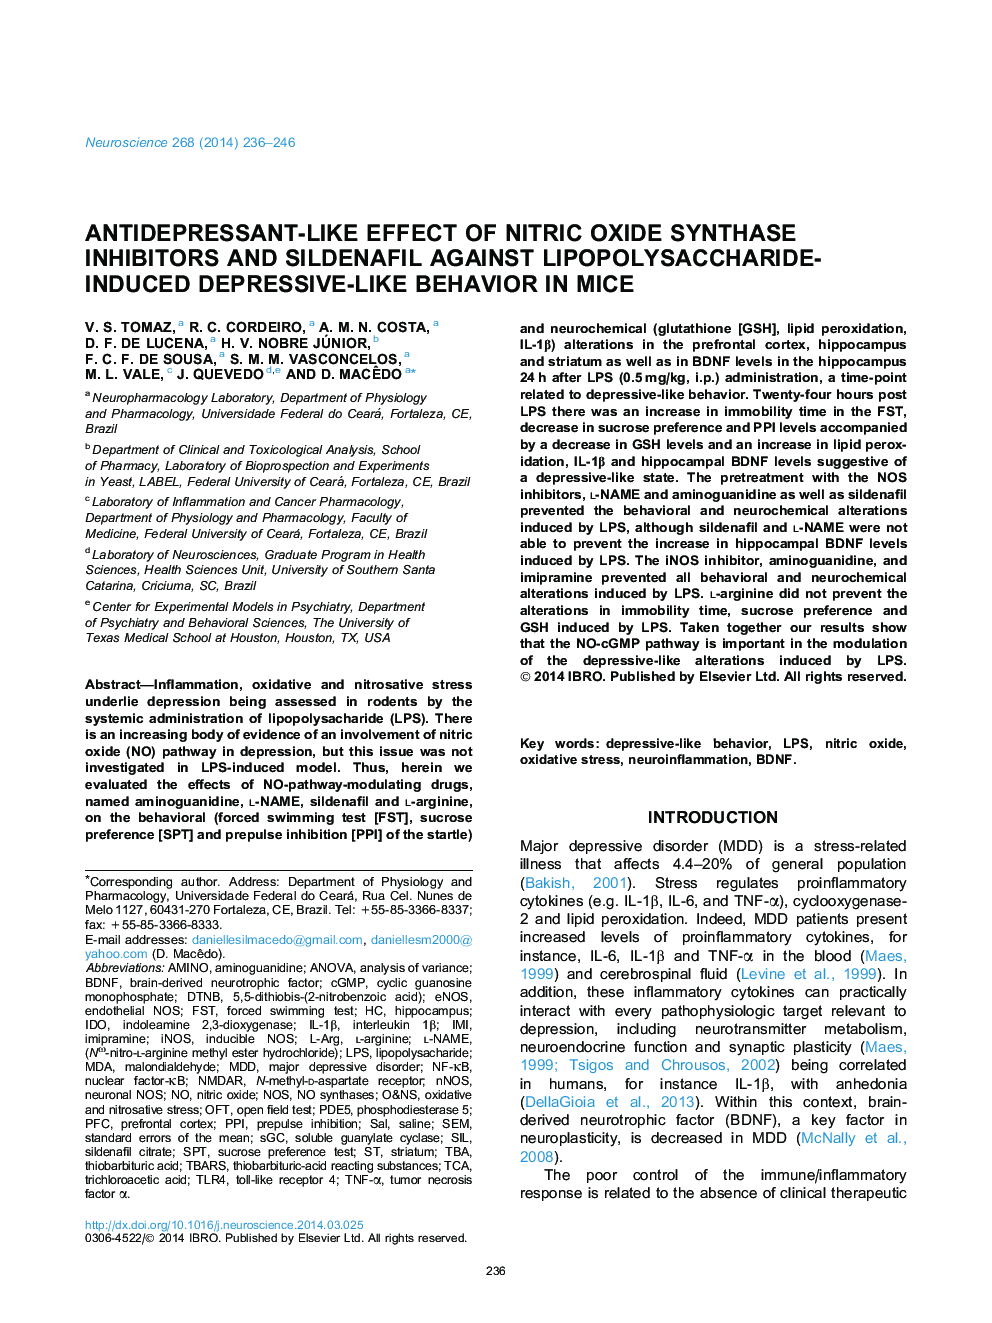 Antidepressant-like effect of nitric oxide synthase inhibitors and sildenafil against lipopolysaccharide-induced depressive-like behavior in mice